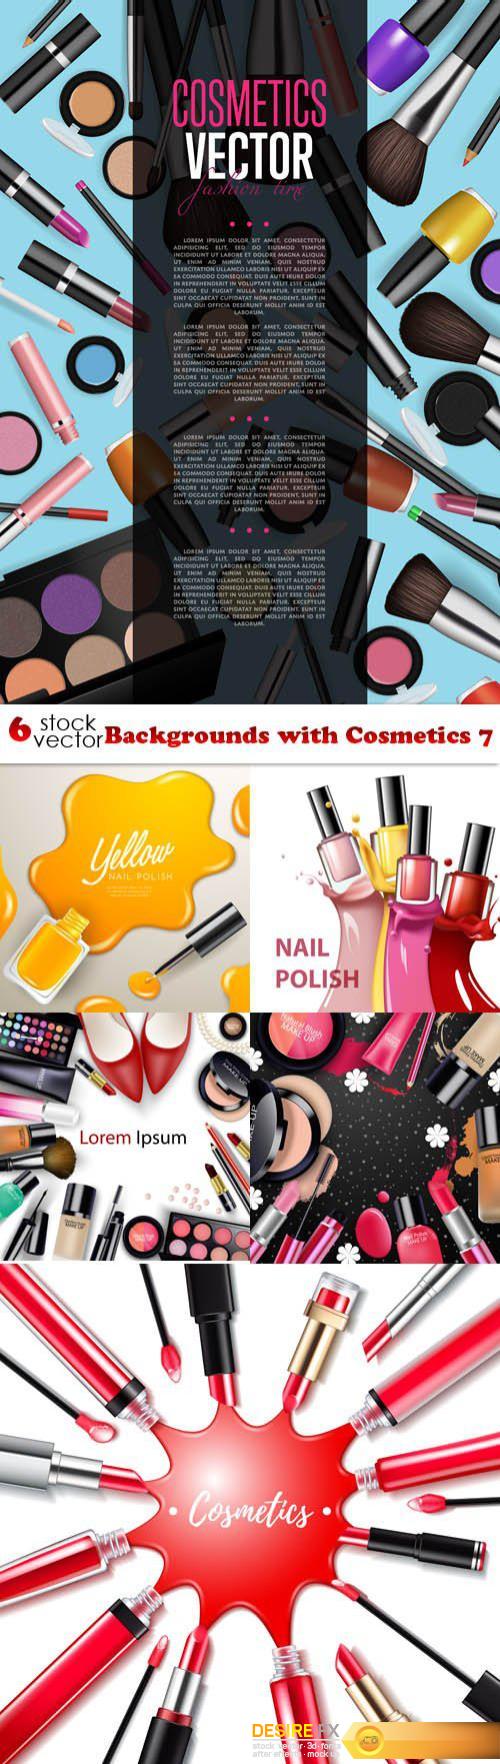 Vectors - Backgrounds with Cosmetics 7